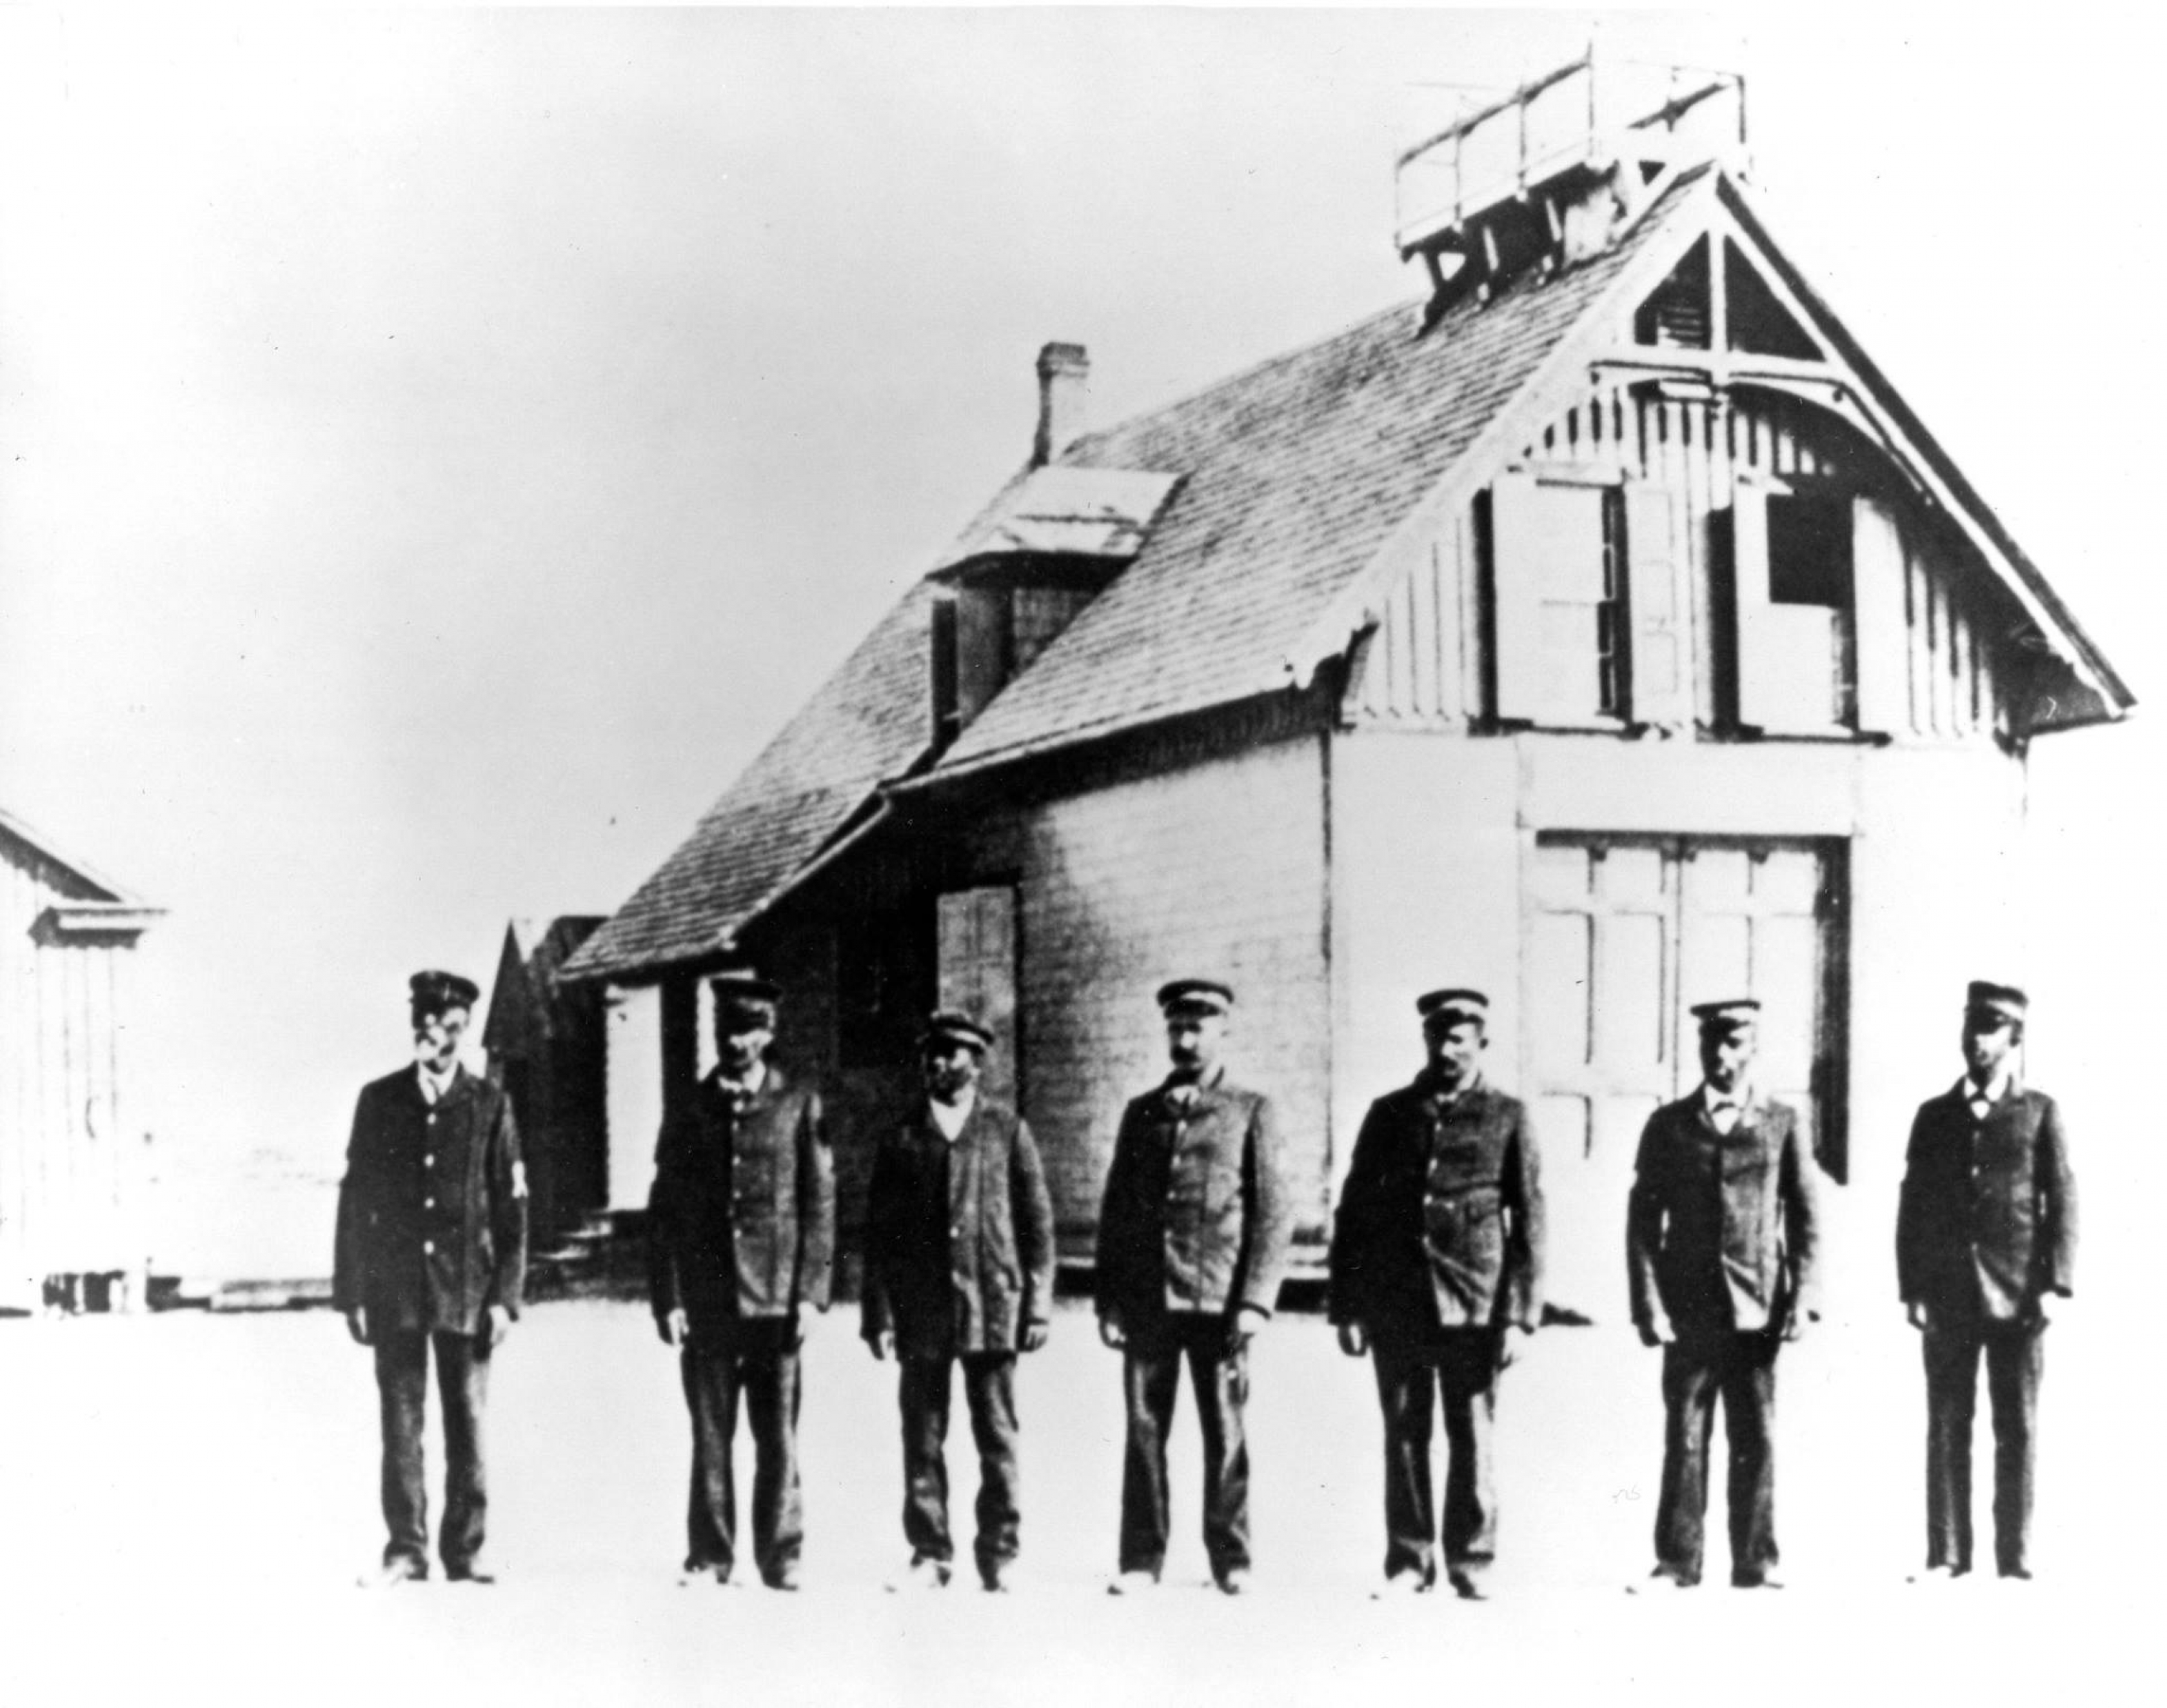 Historical image of Captain Richard Etheridge and his crew at Cape Hatteras National Seashore